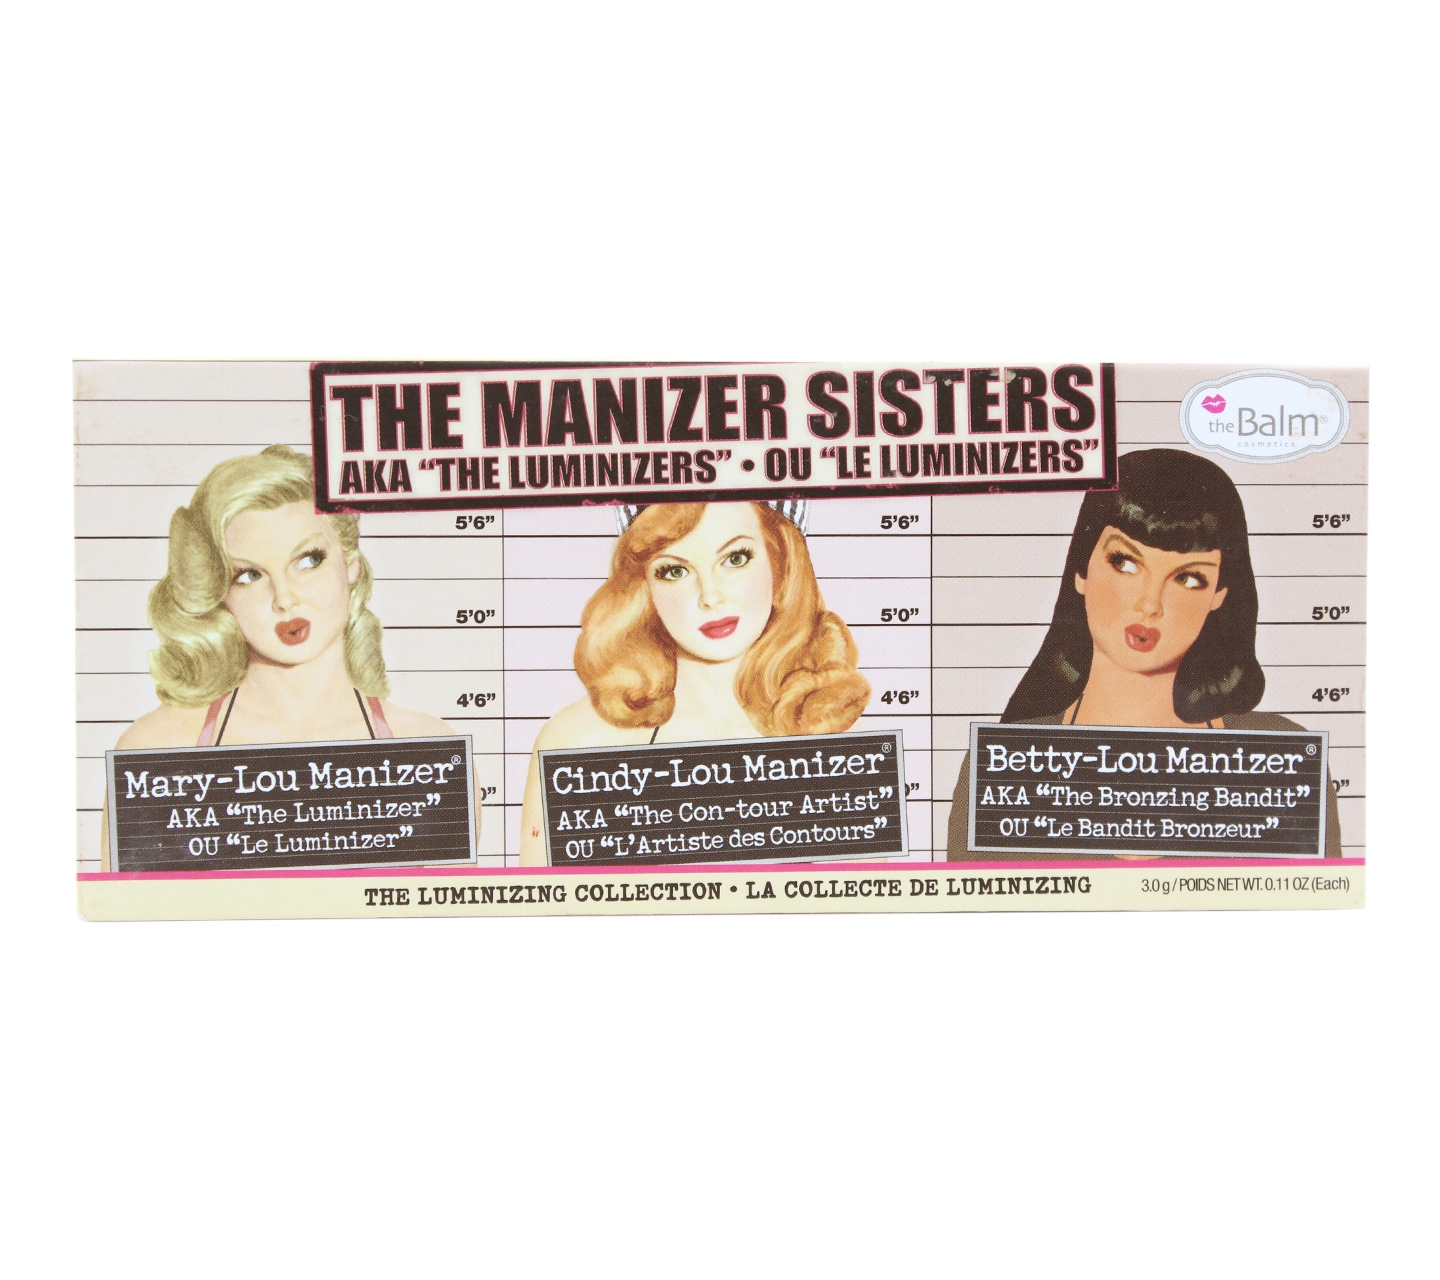 The Balm The Manizer Sisters Sets and Palette